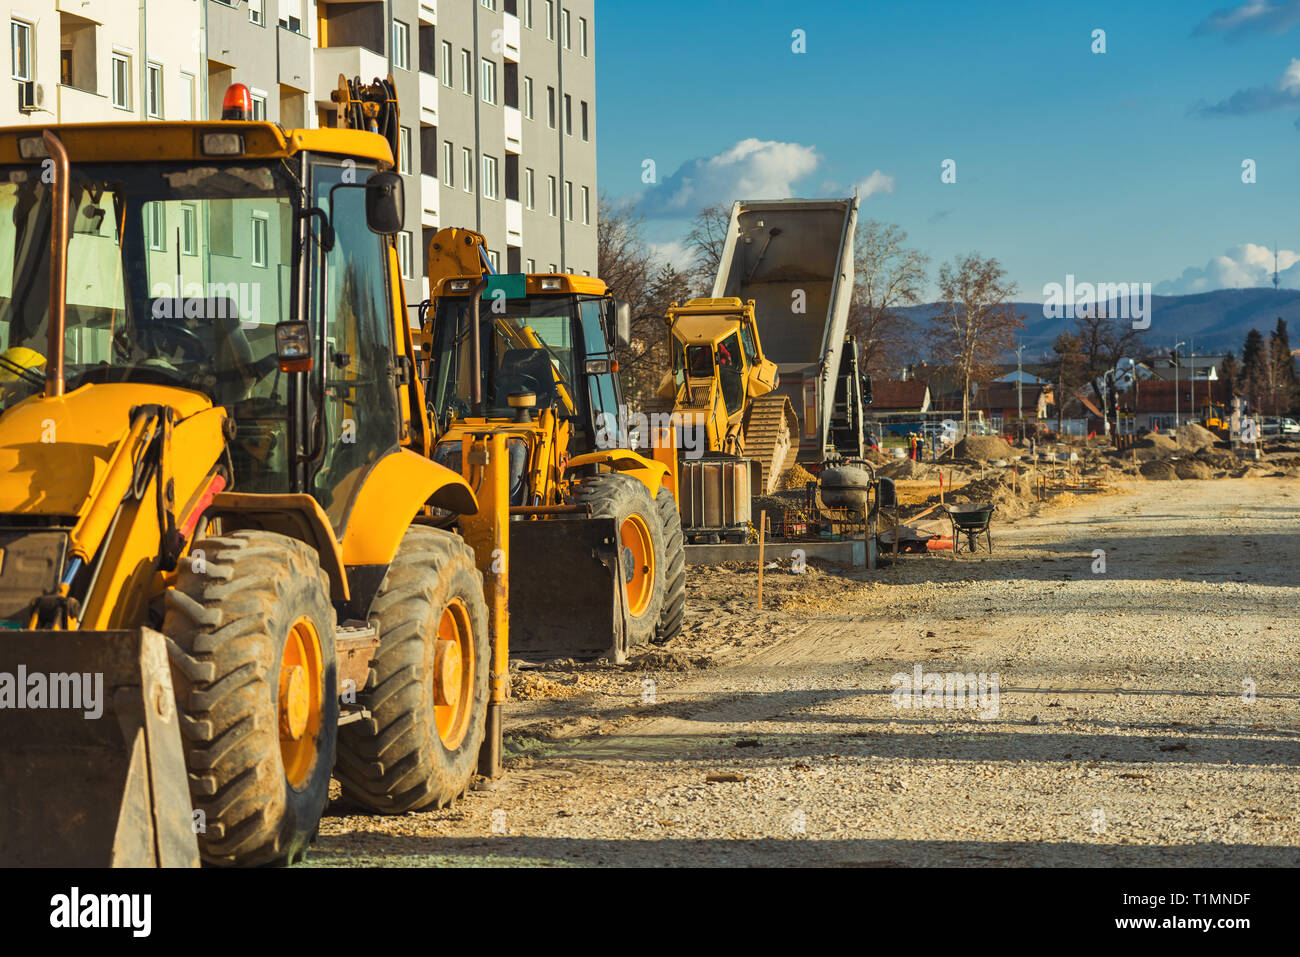 Construction vehicle with loader on building site, industrial heavy machinery Stock Photo